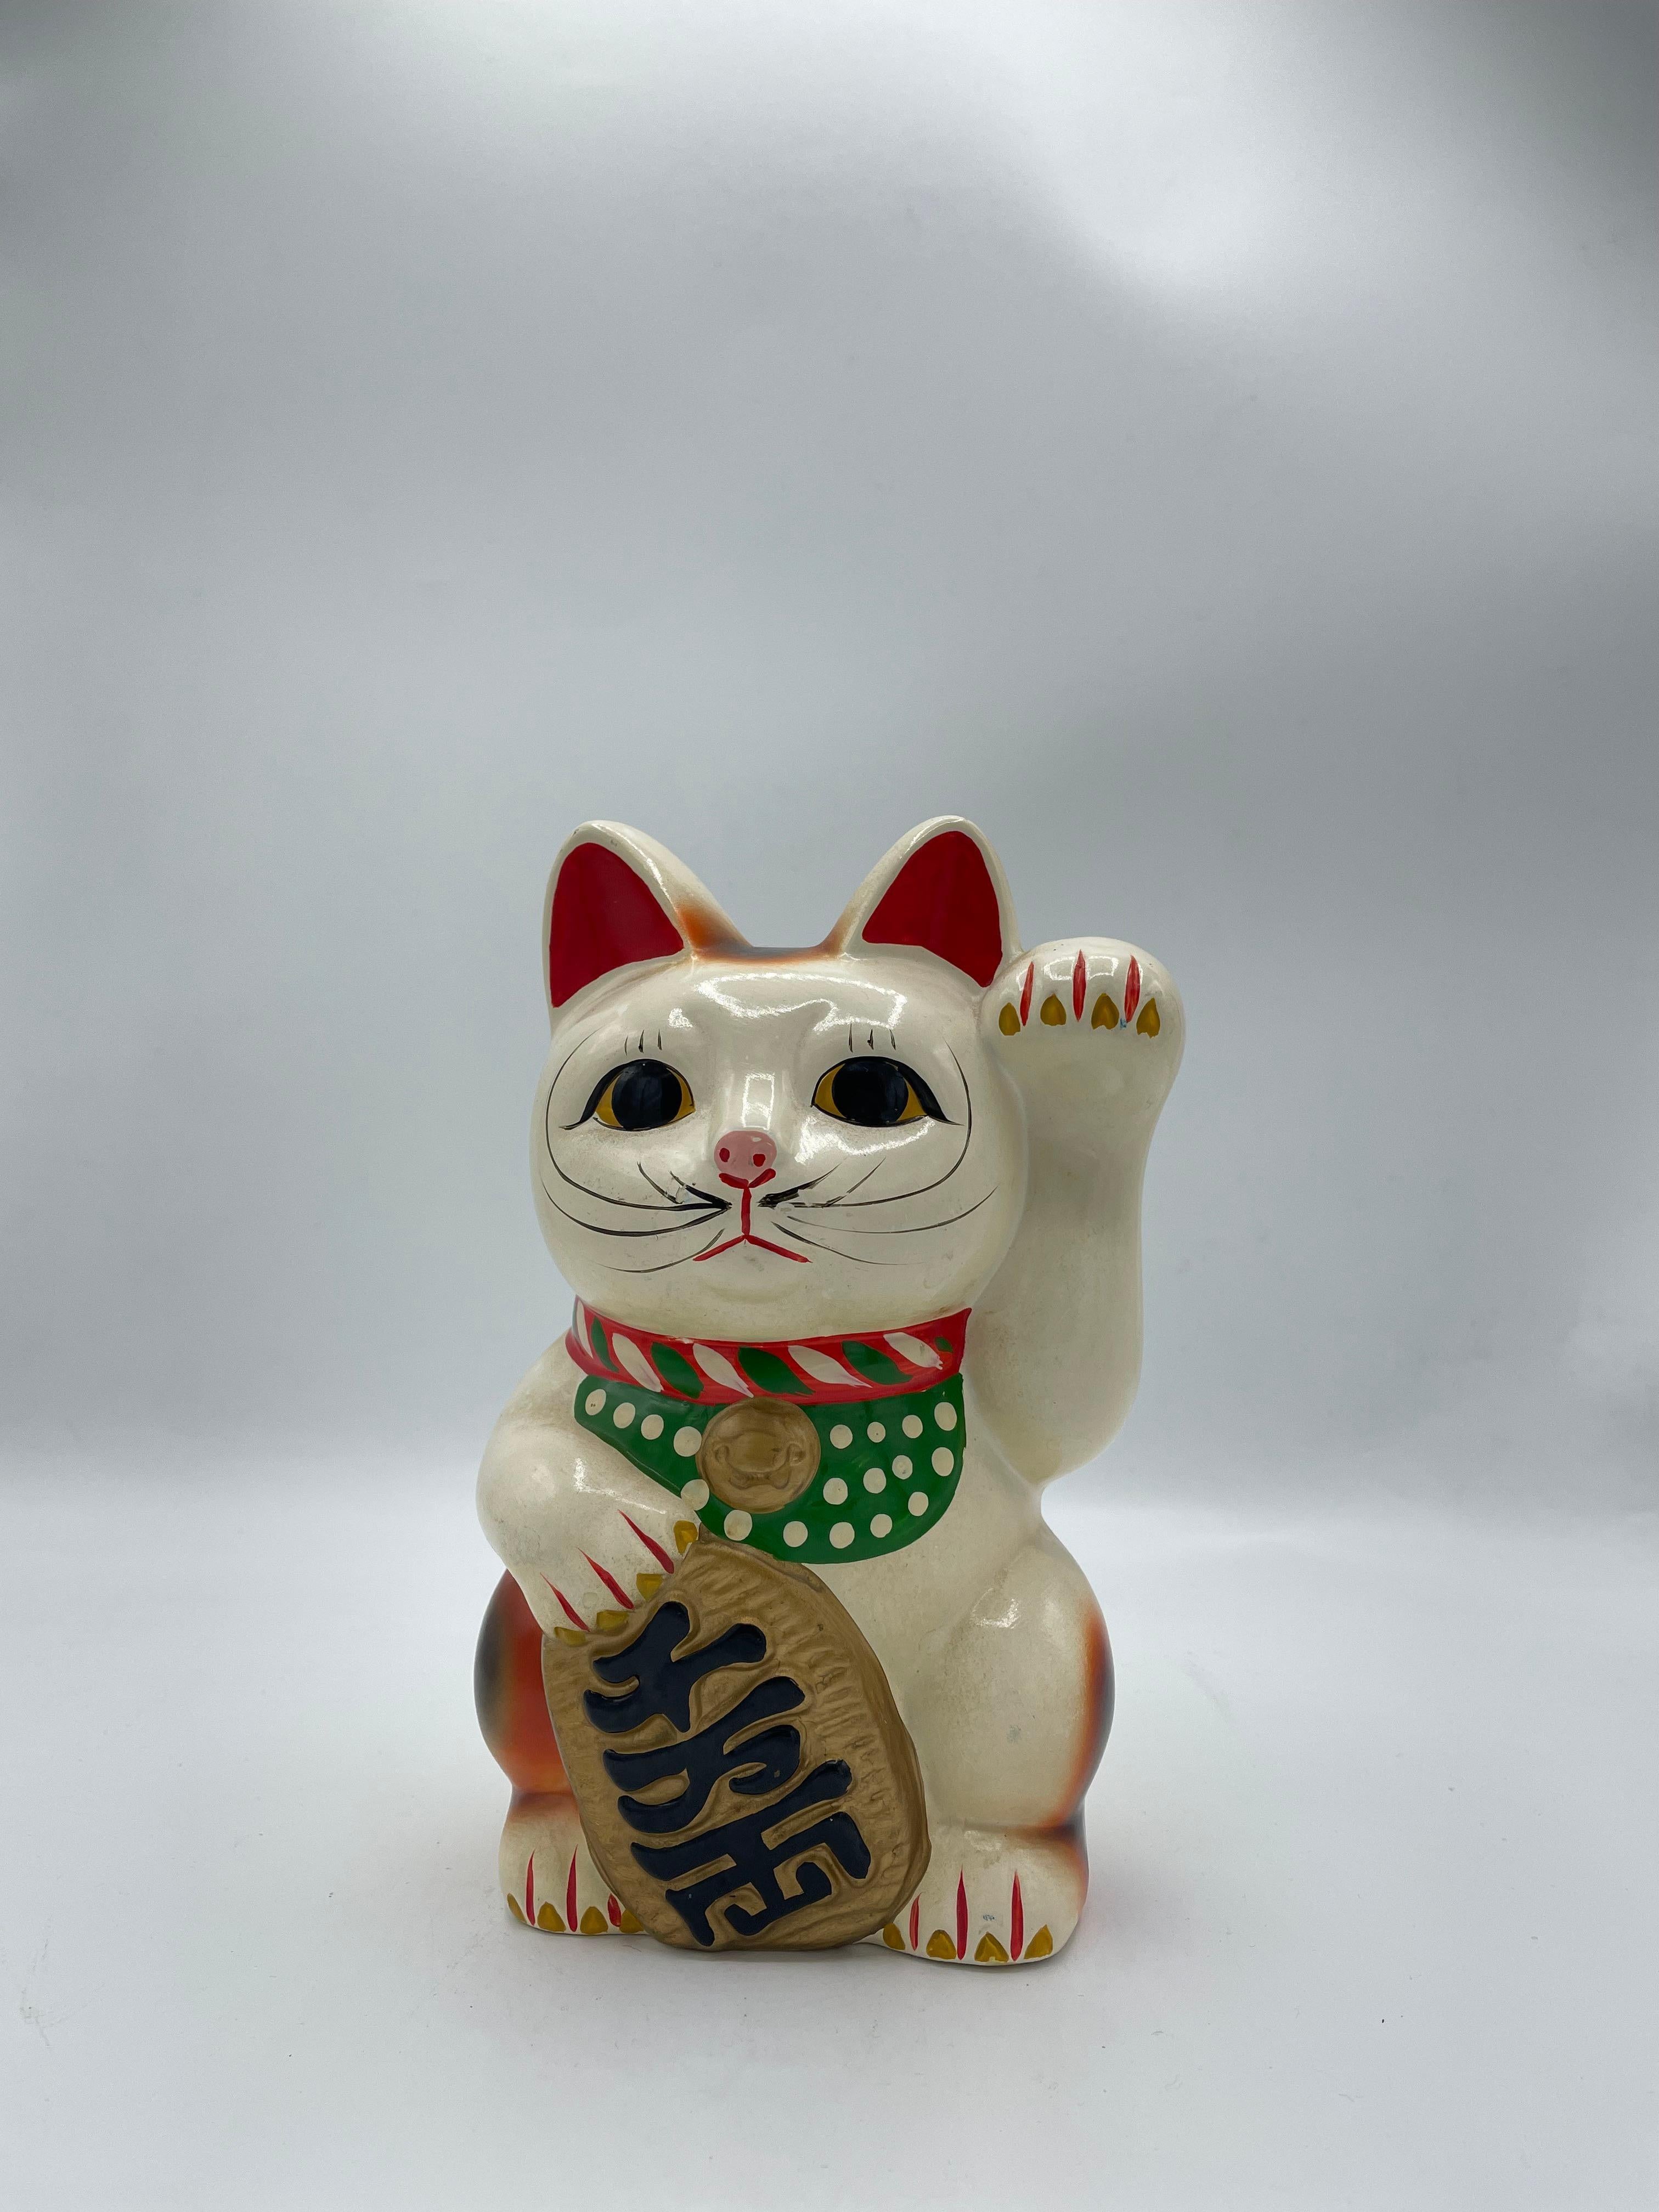 This is a piggy bank of manekineko cat. It is made with Pottery and it was made around 1980s in Showa era.

The maneki-neko is a common Japanese figurine which is often believed to bring good luck to the owner. In modern times, they are usually made